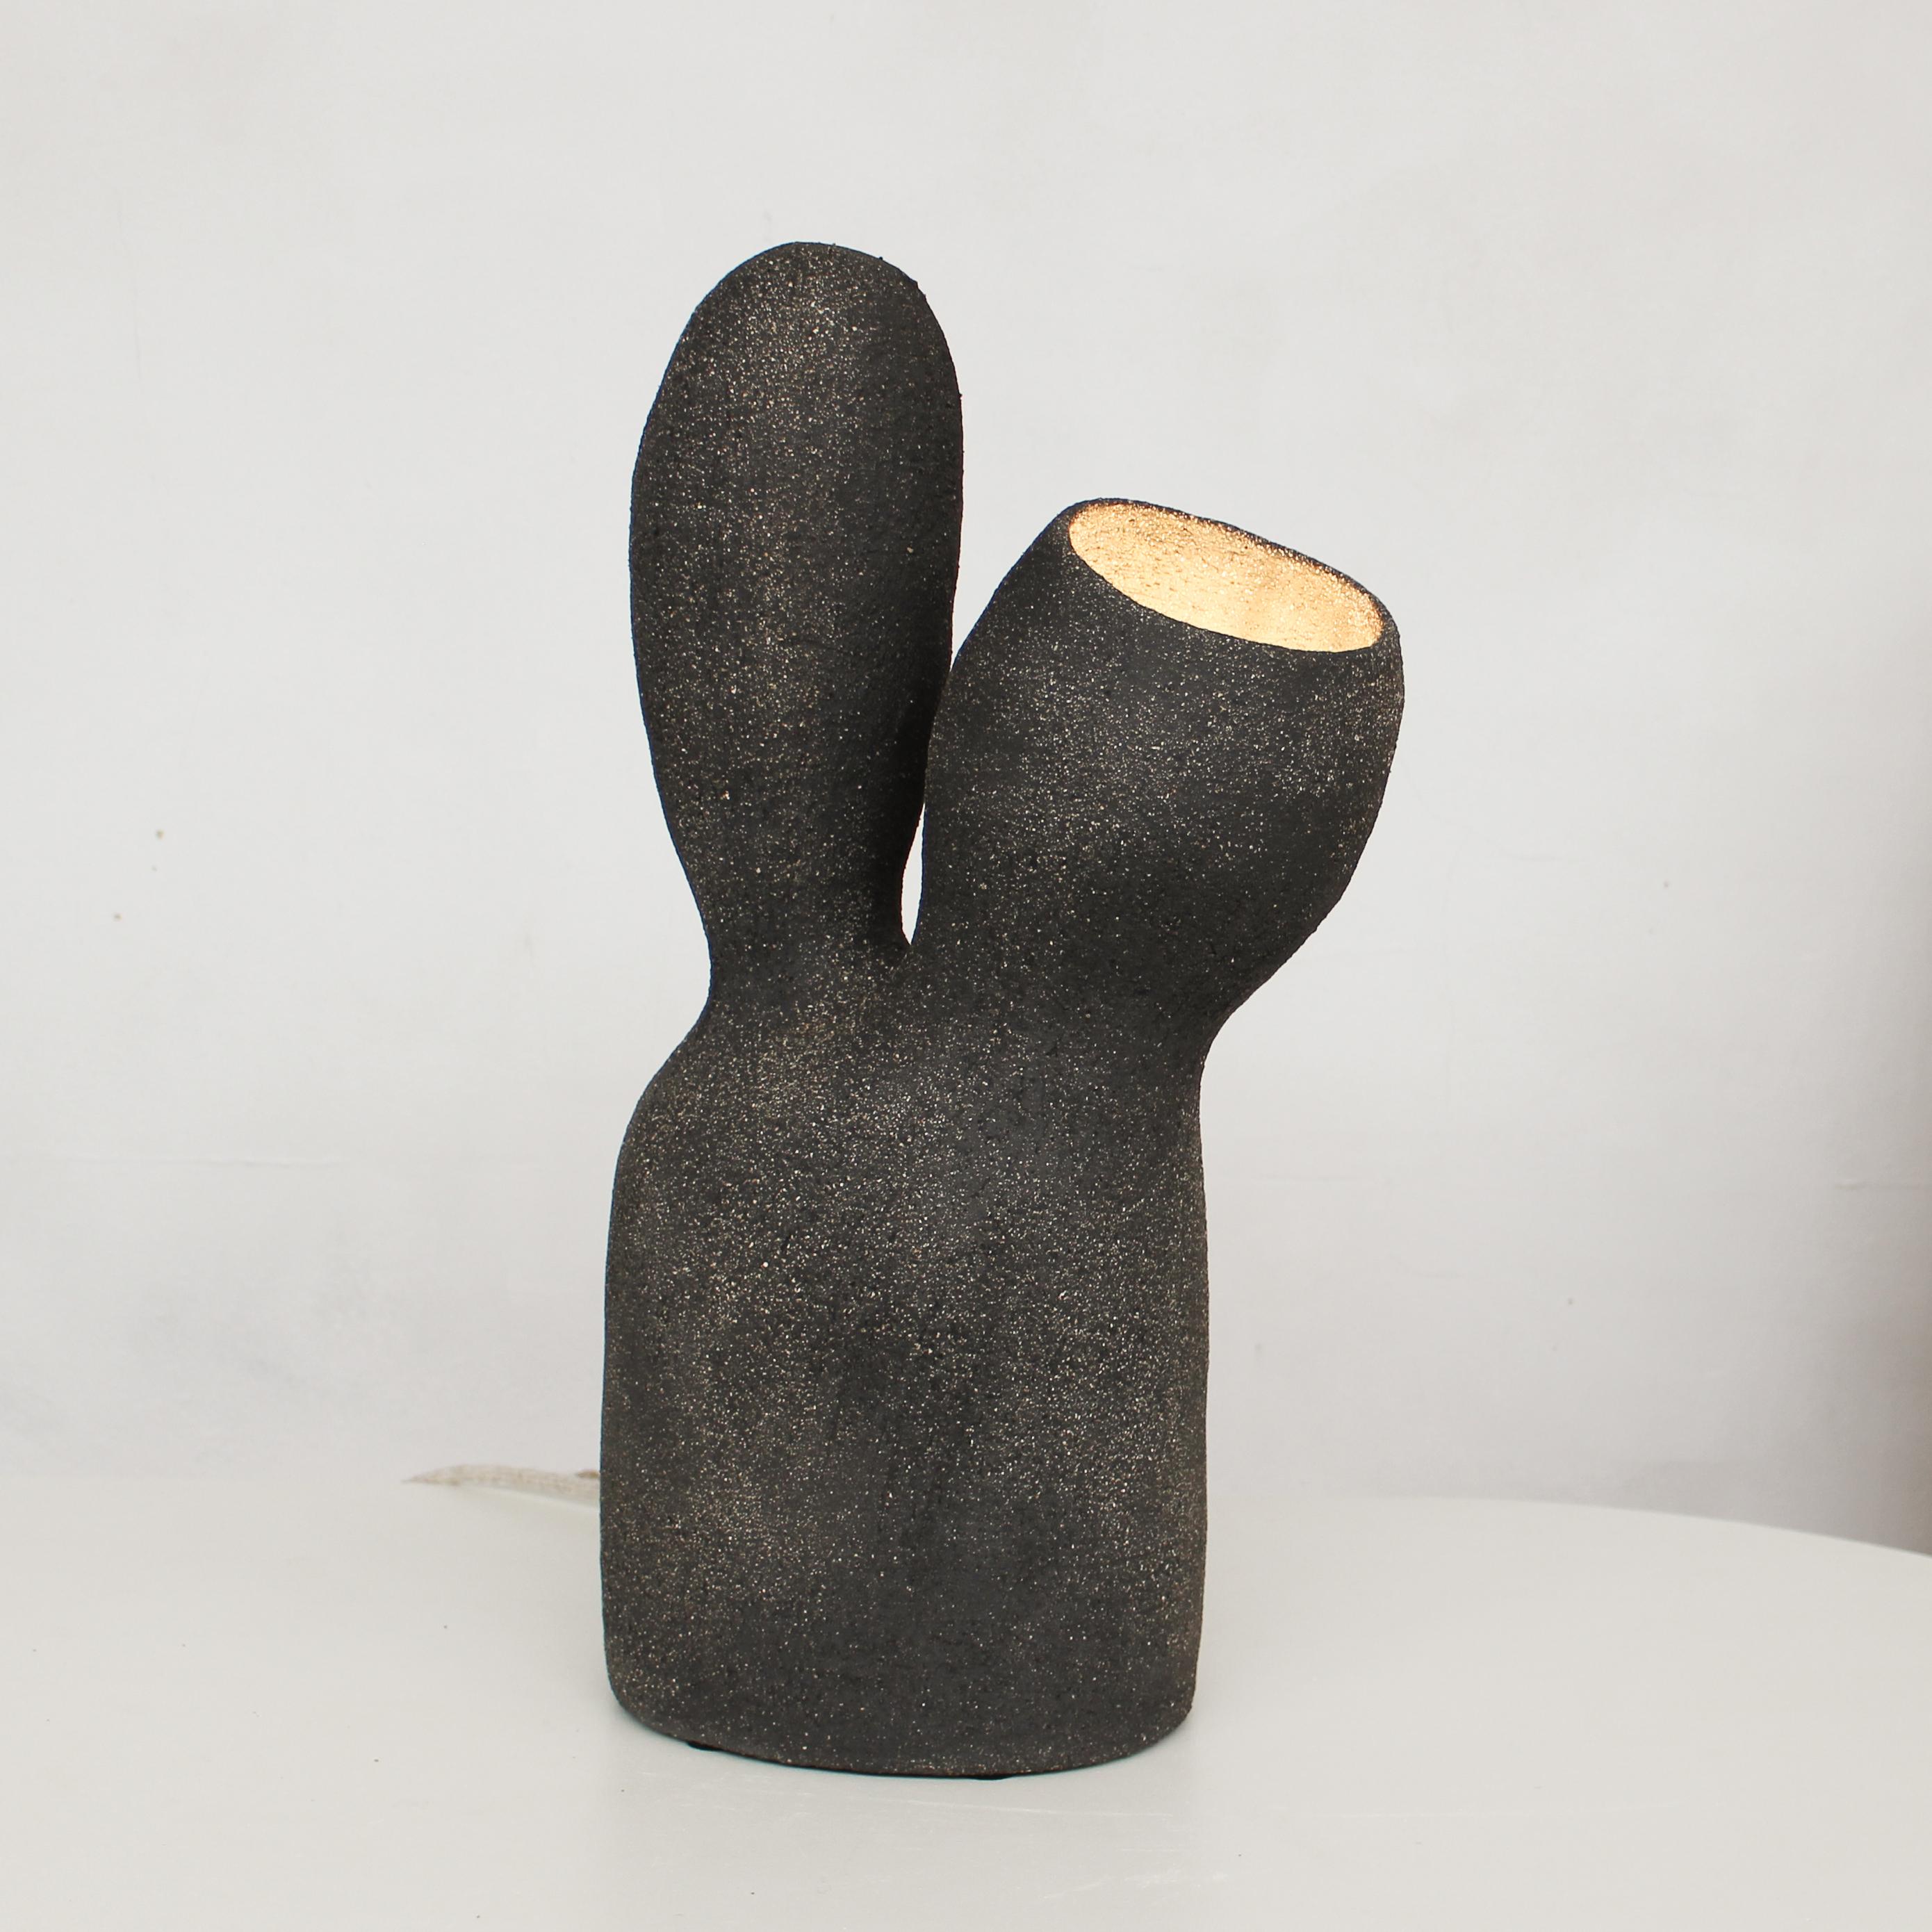 Opéra black stoneware table lamp by Elisa Uberti
Materials: Black stoneware
Dimensions: 50 x 27 x 16.5 cm

After fifteen years in fashion, Elisa Uberti decides to take the time to work with these hands and to give birth to new projects.

Designer